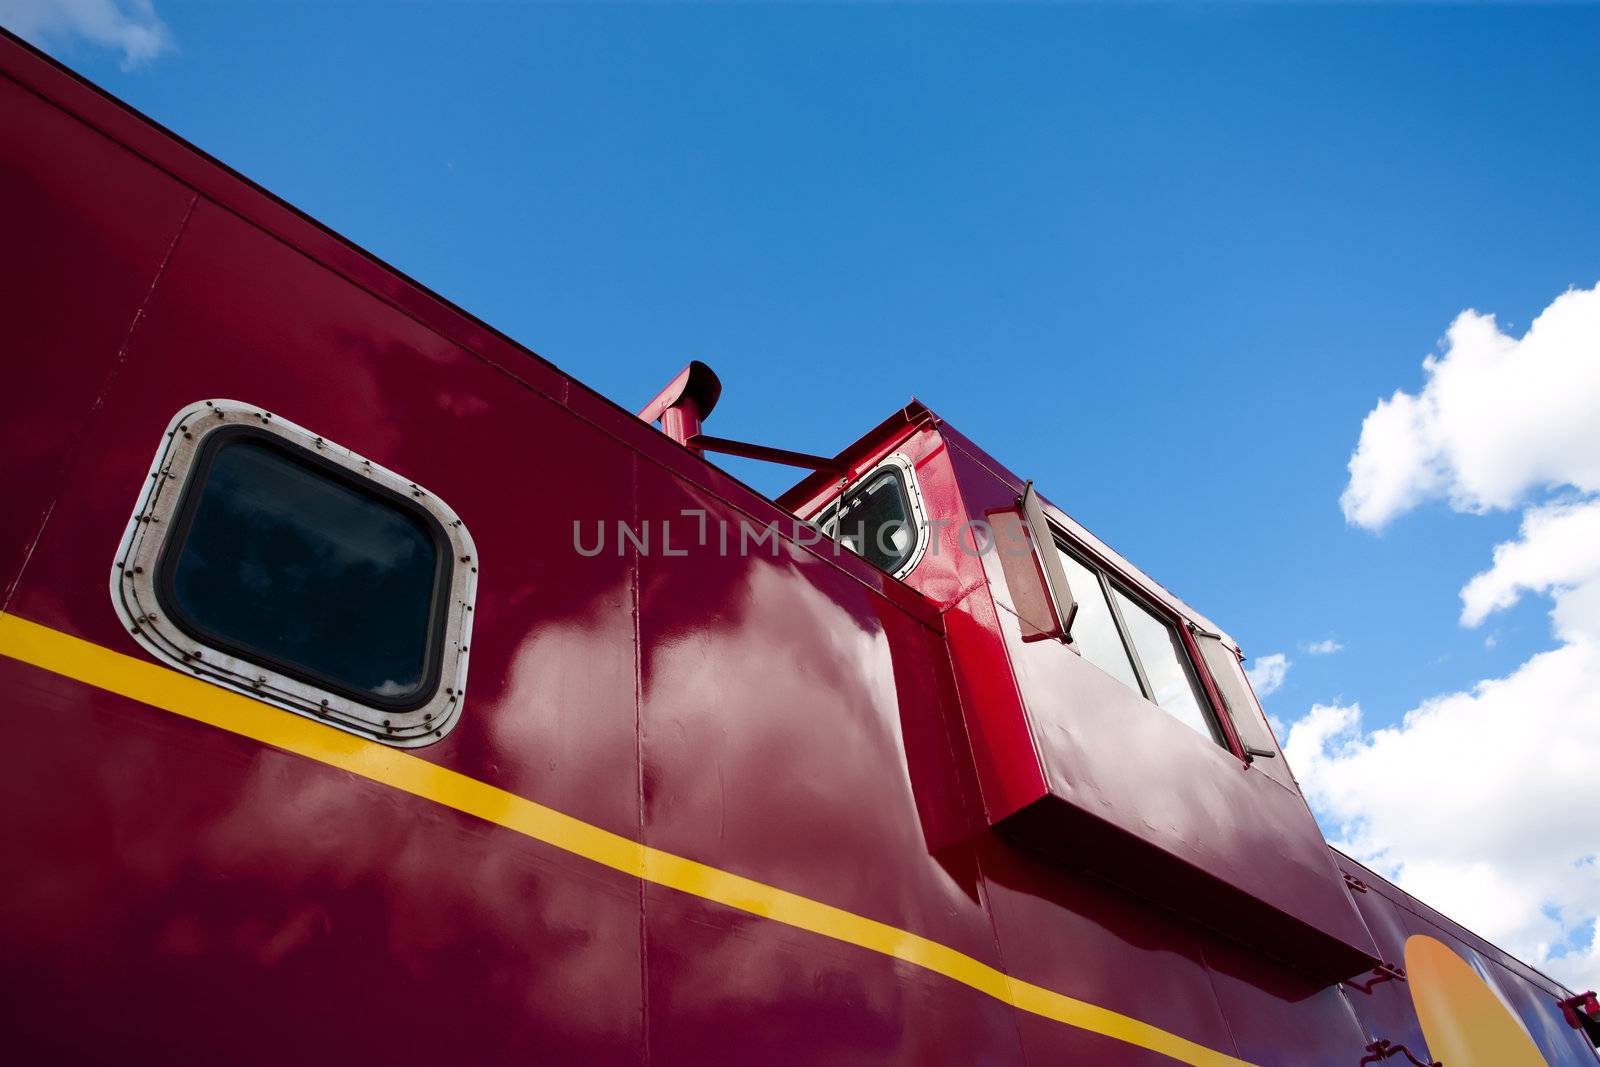 Detail of train caboose by Creatista